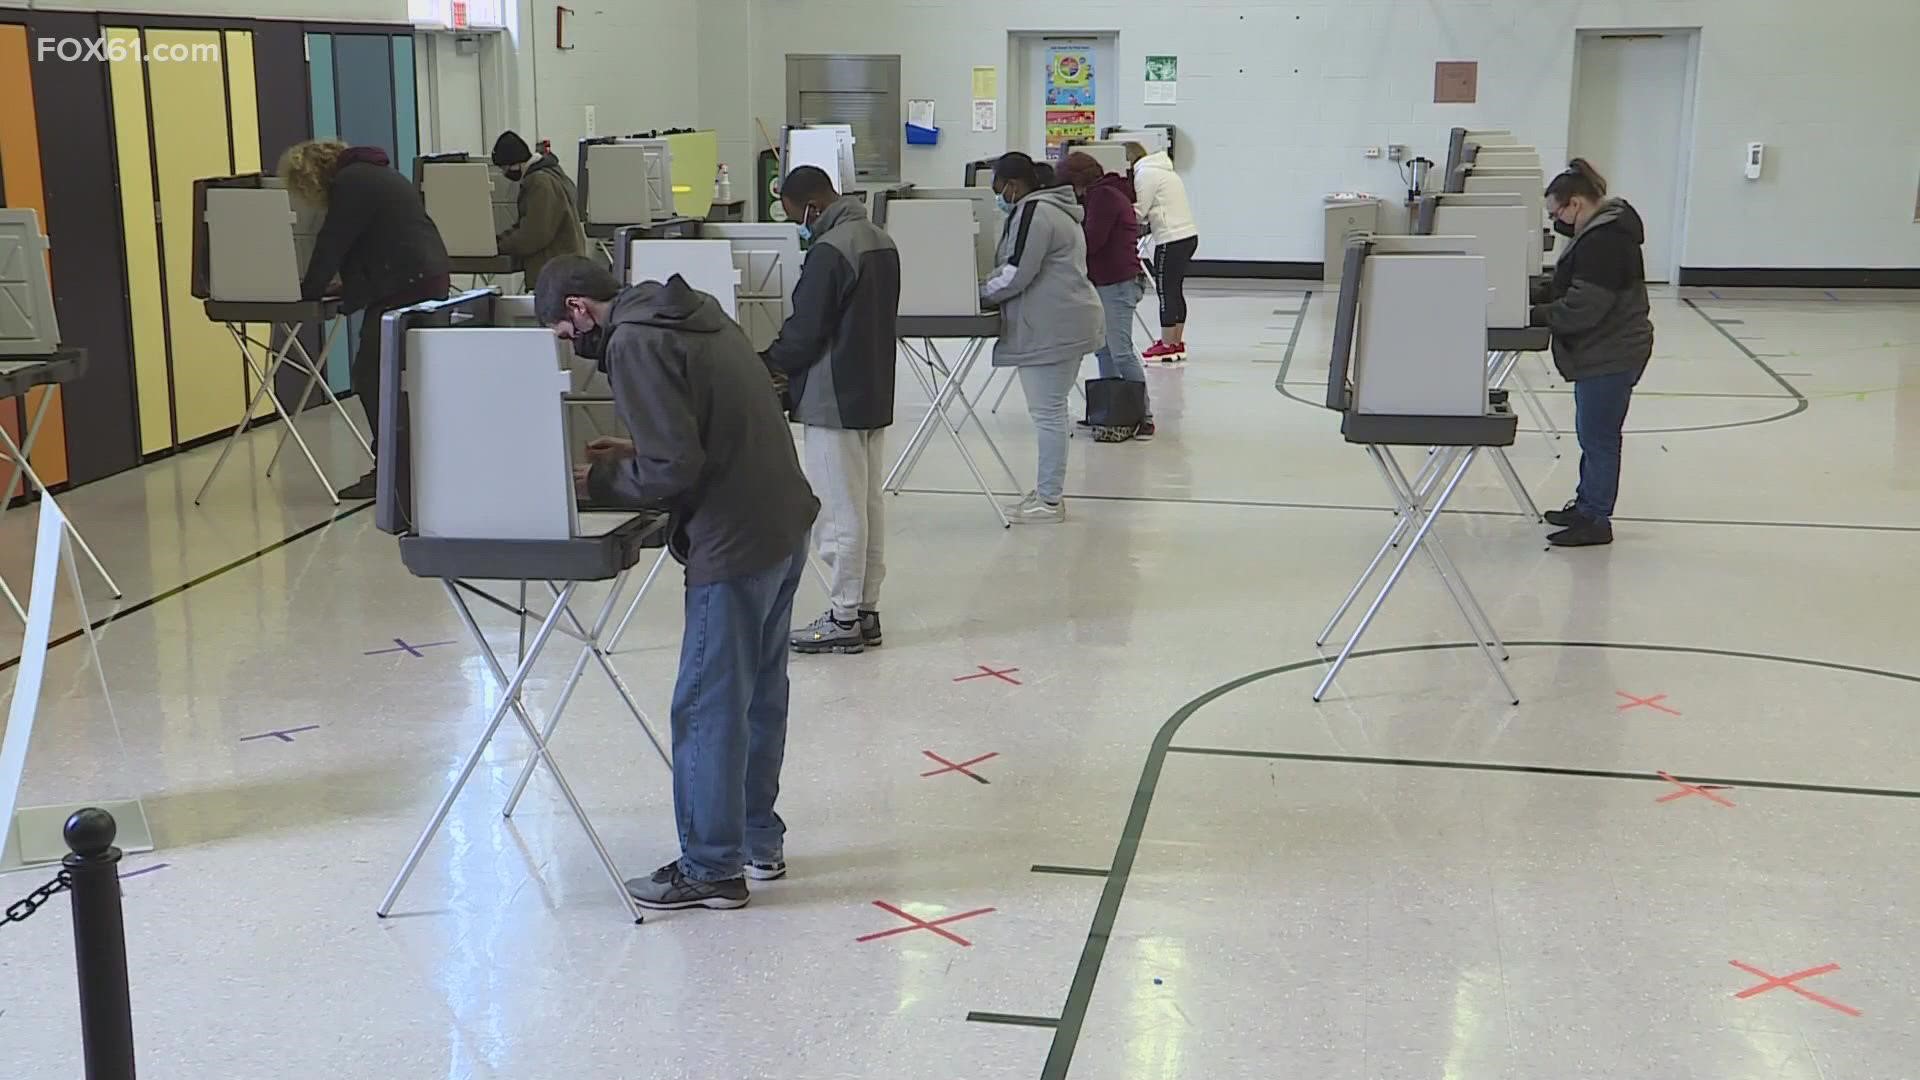 Cities prepare months in advance for election day.